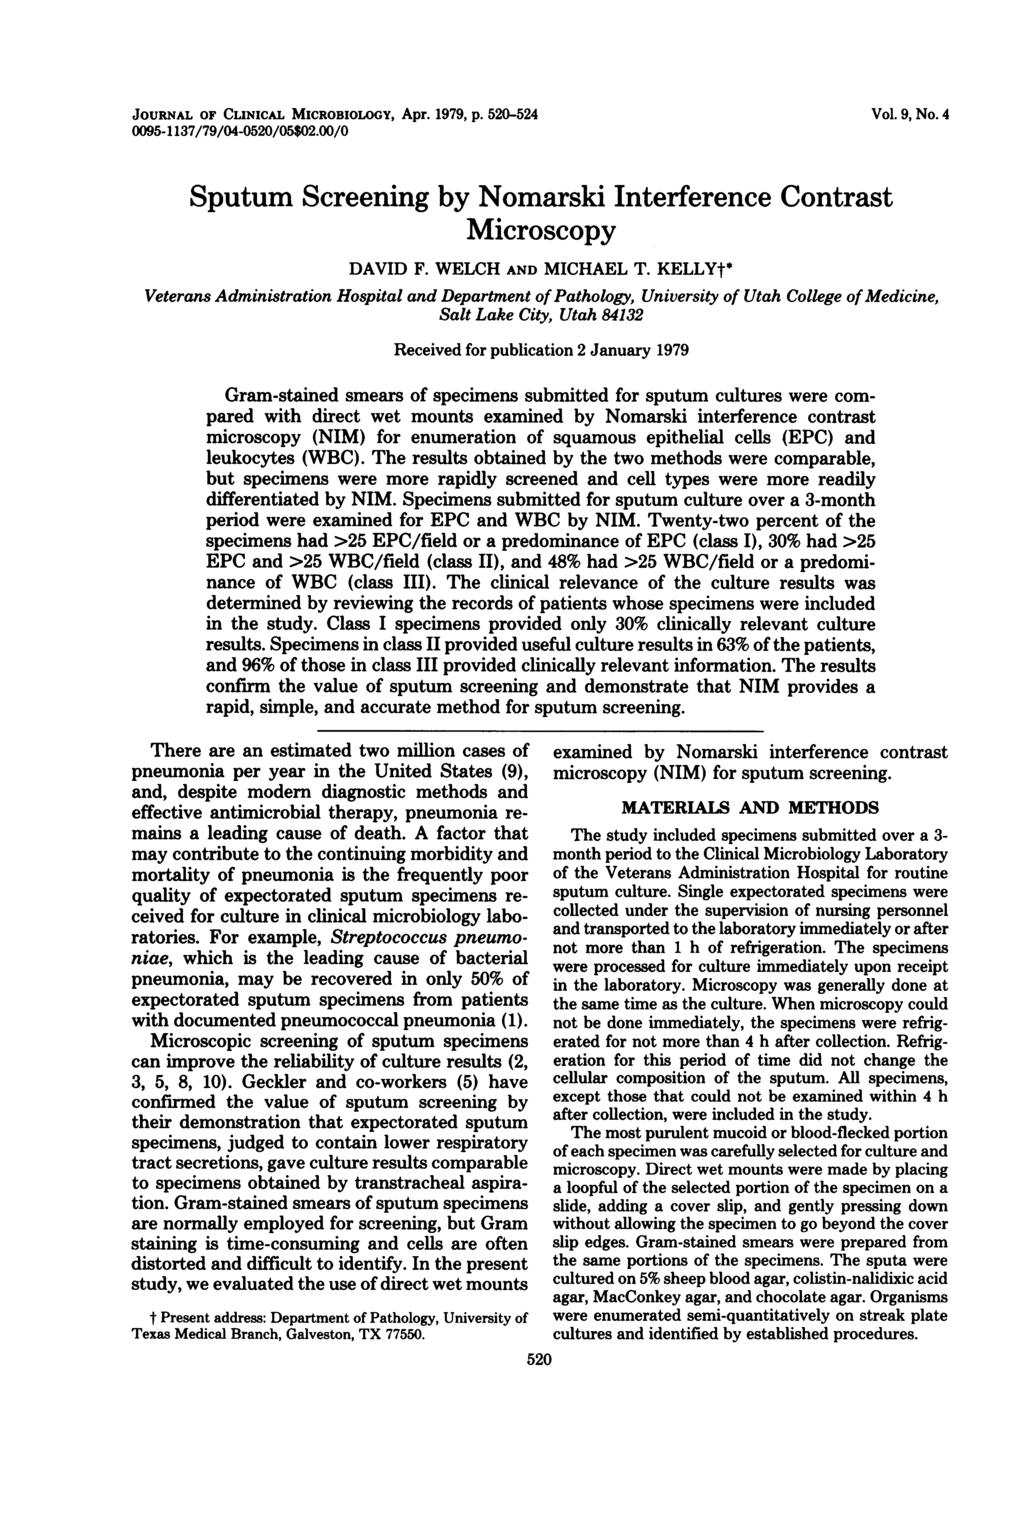 JOURNAL OF CLINICAL MICROBIOLOGY, Apr. 1979, p. 520-524 0095-1137/79/04-0520/05$02.00/0 Vol. 9, No. 4 Sputum Screening by Nomarski Interference Contrast Microscopy DAVID F. WELCH AND MICHAEL T.